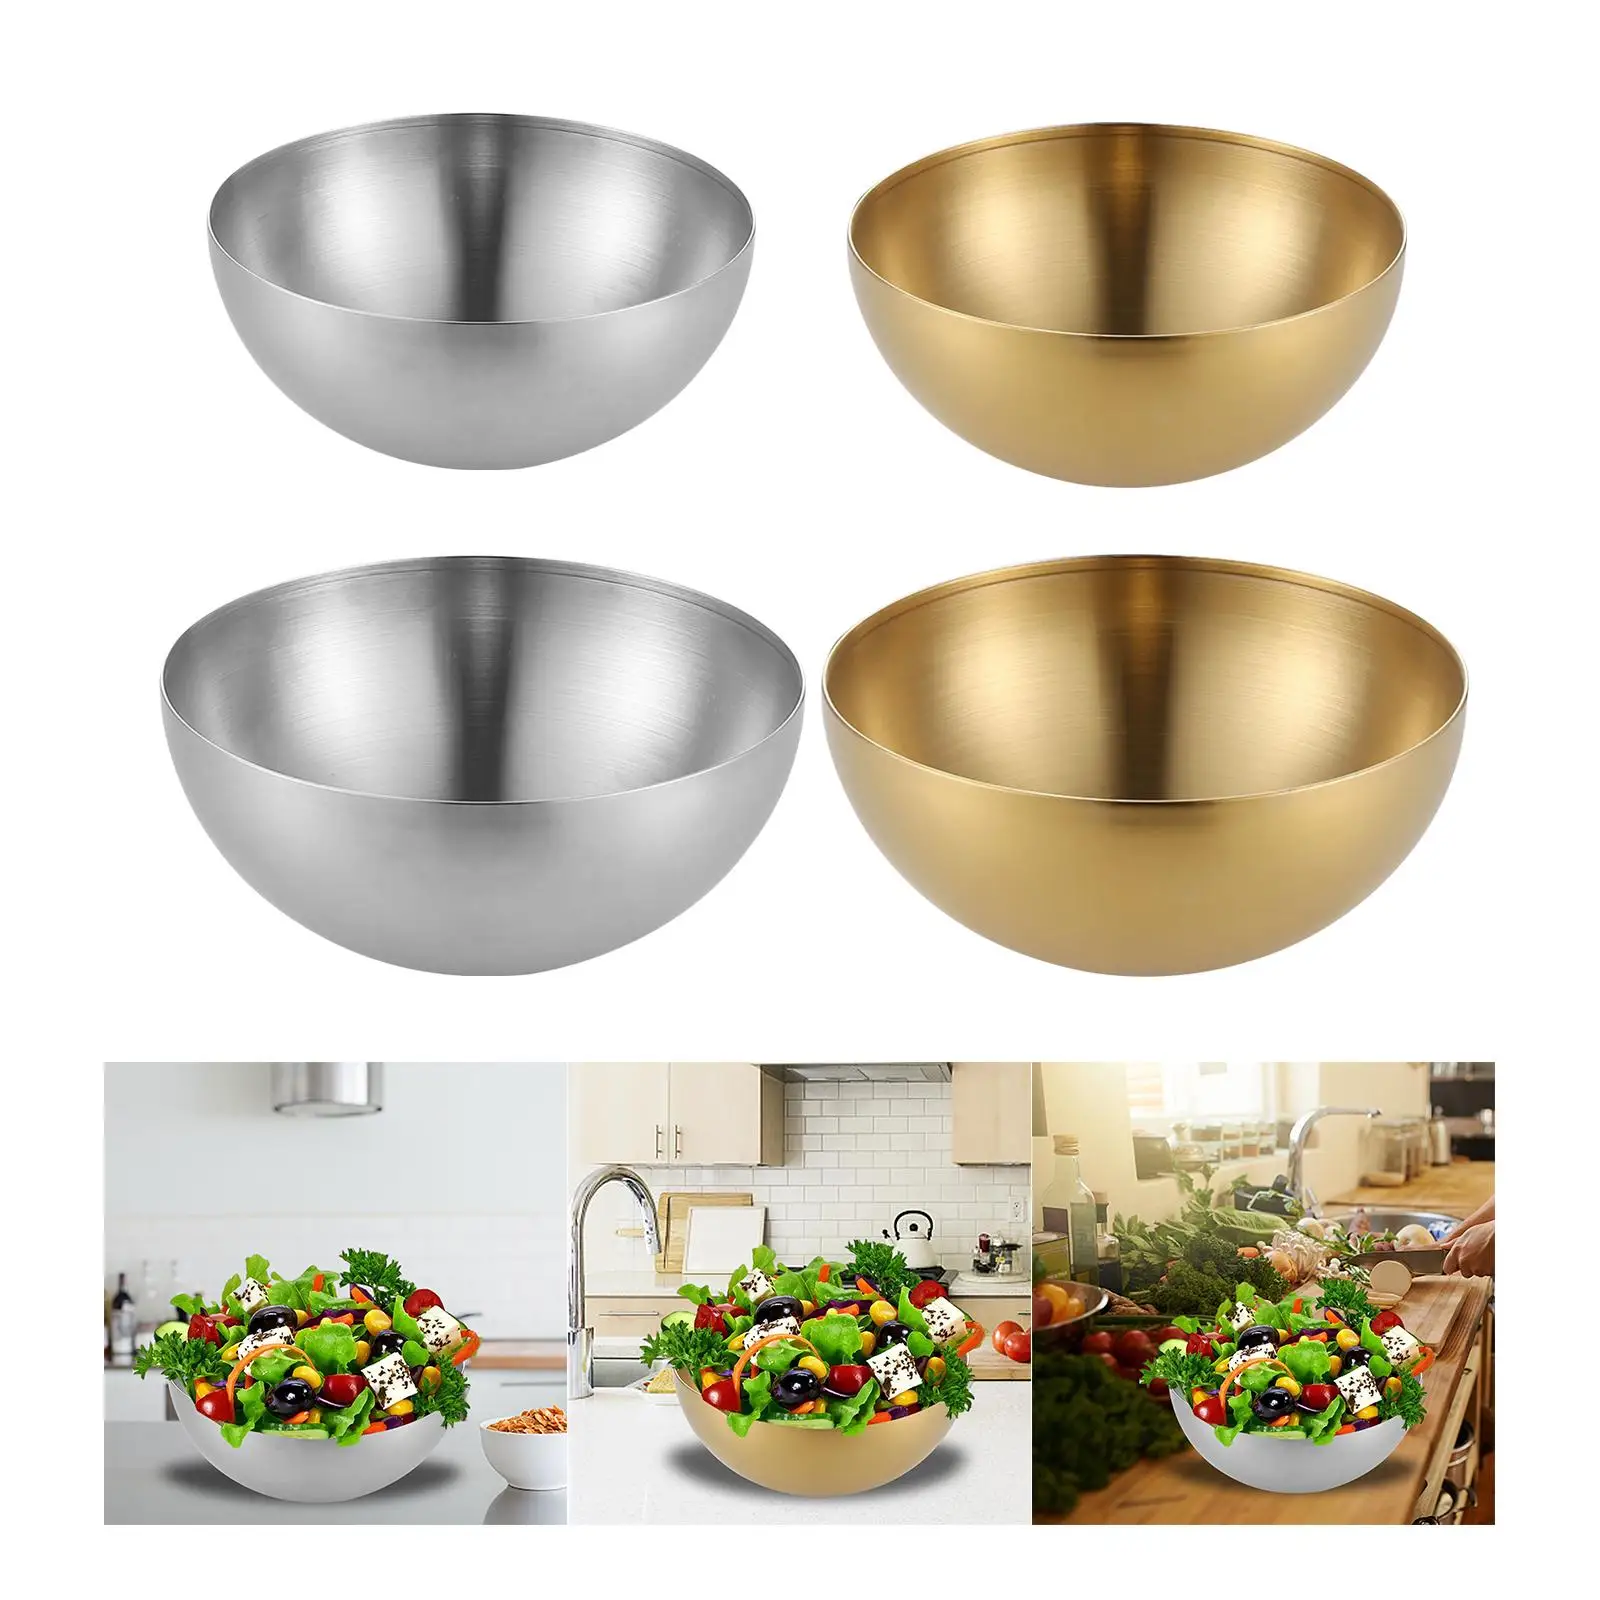 Stainless Steel Mixing Bowls Food Storage Organizers Lightweight Salad Bowls Soup Bowls Multifunction Metal Bowls for Cooking